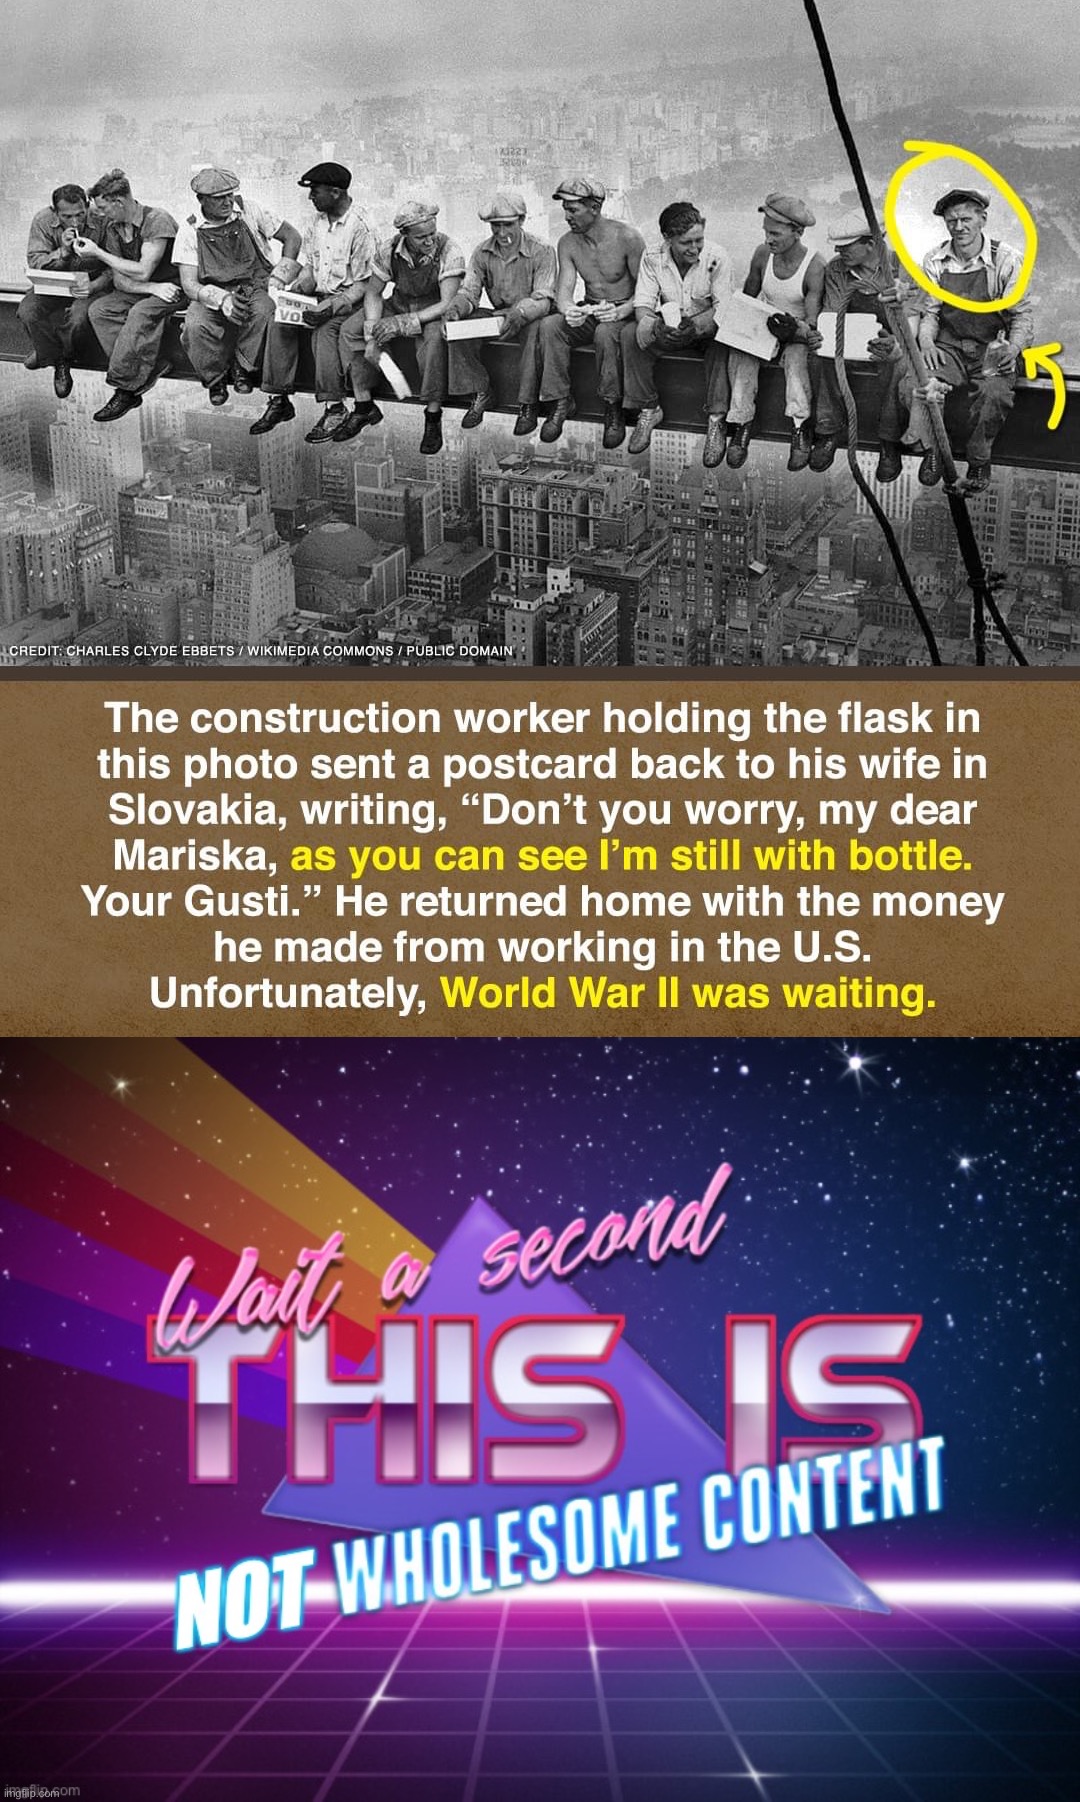 oop | image tagged in empire state building construction worker,wait a second this is not wholesome content,oop,not,wholesome 100,wwii | made w/ Imgflip meme maker